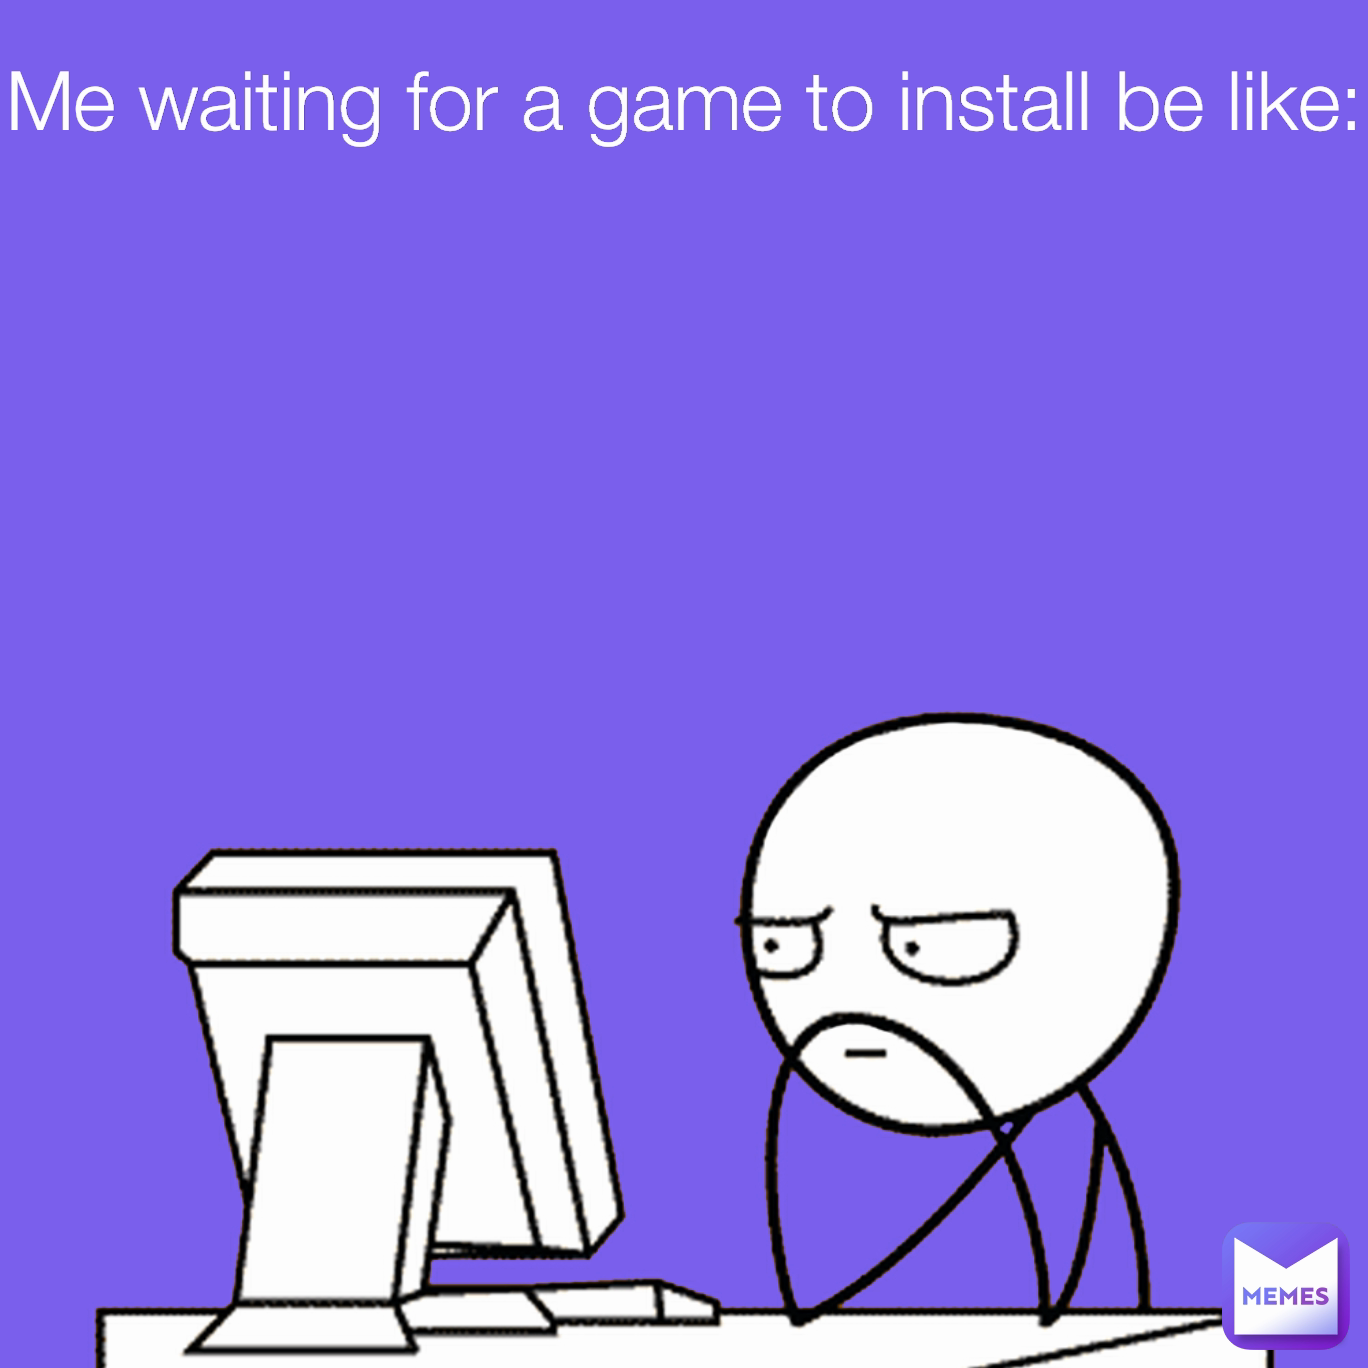 Me waiting for a game to install be like: